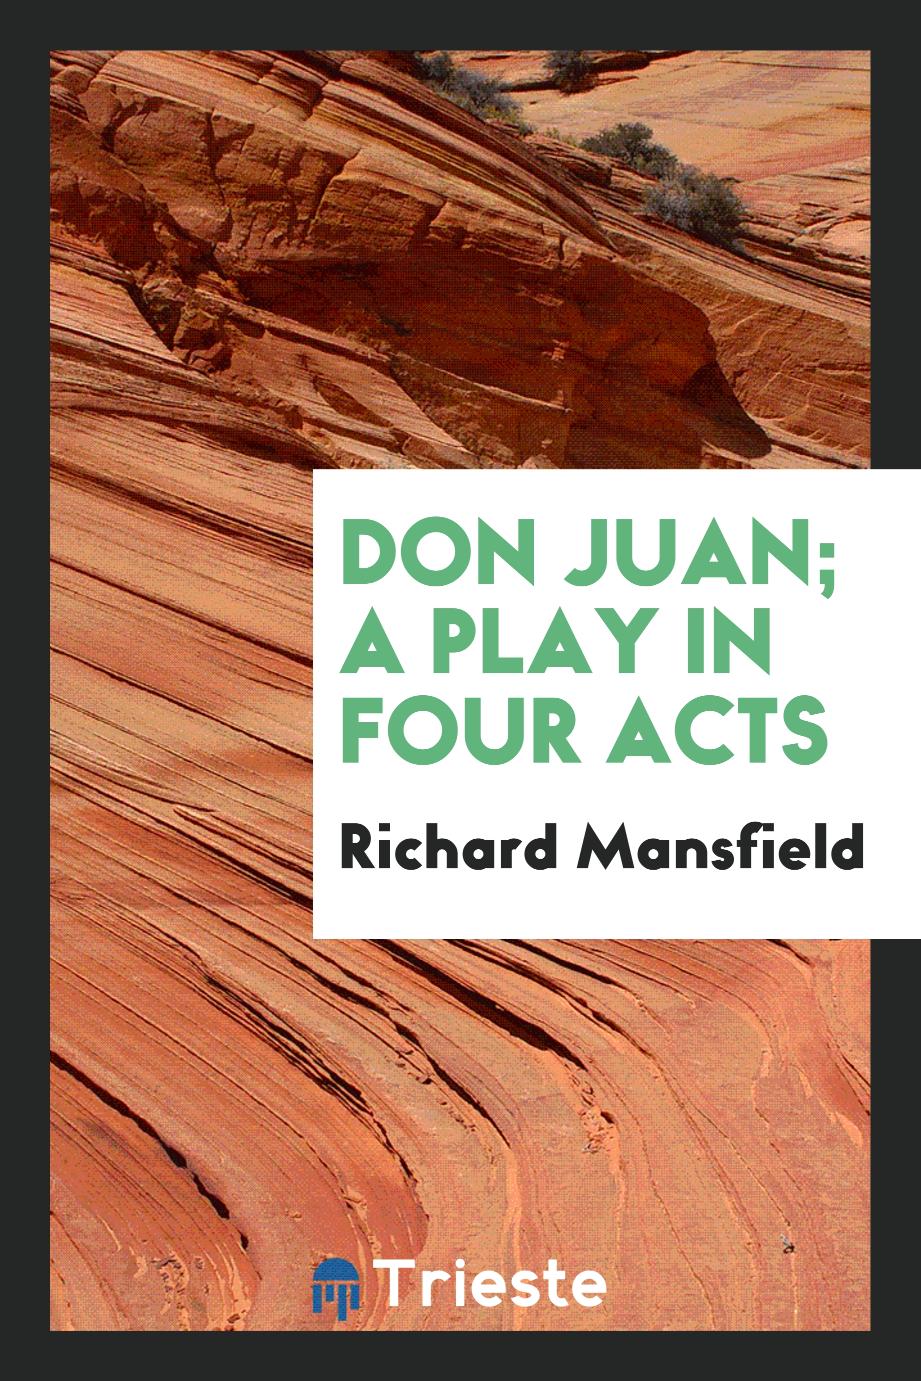 Richard Mansfield - Don Juan; a play in four acts